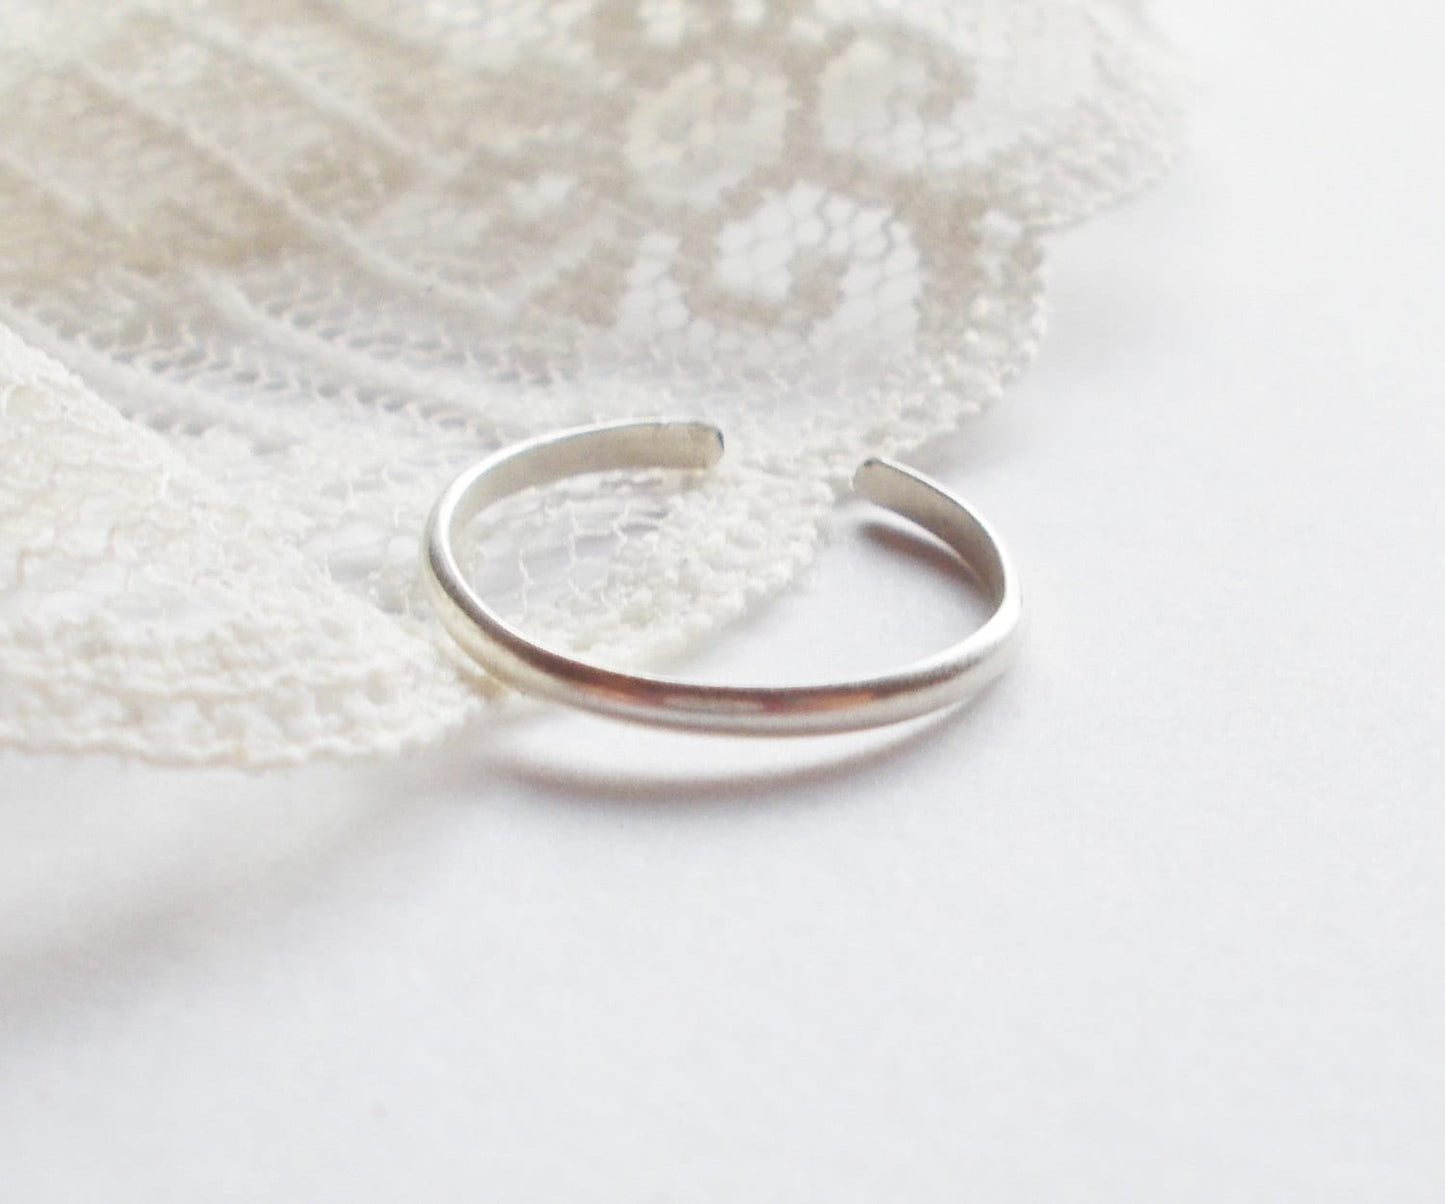 Adjustable Sterling Silver Toe Ring - Simple Toe Ring